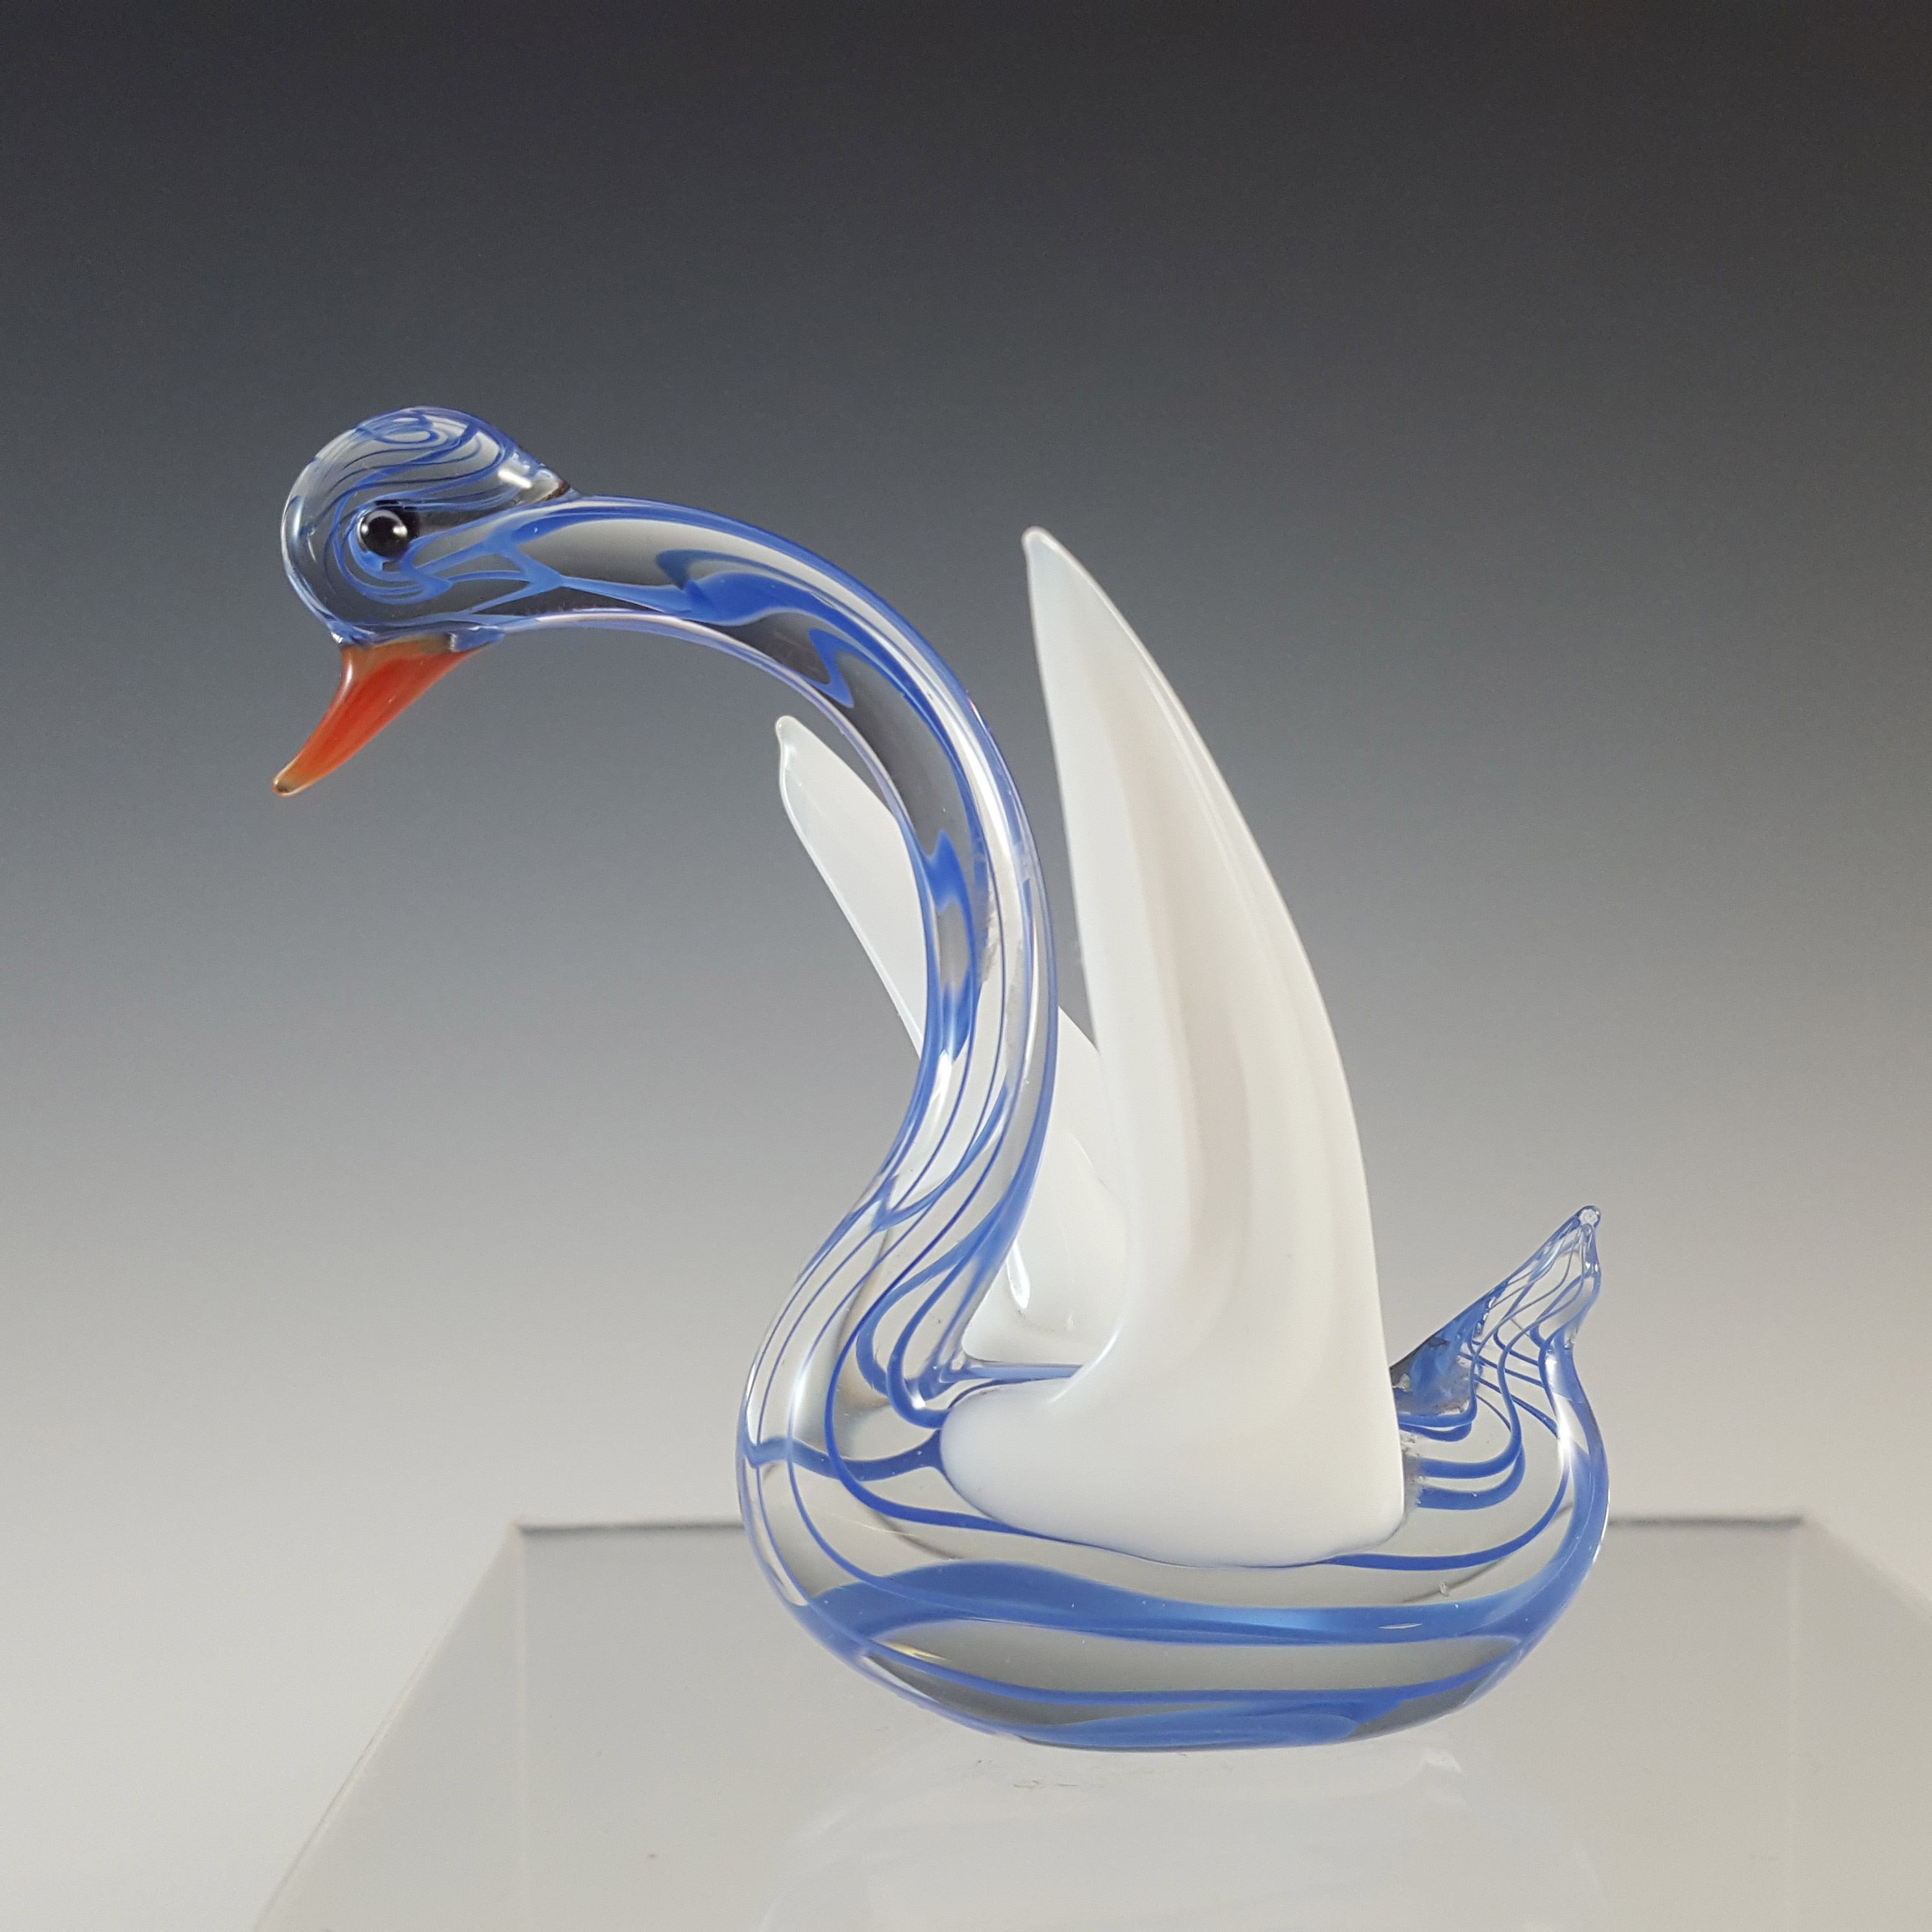 Japanese Blue & White Lampworked Glass Swan Figurine - Click Image to Close